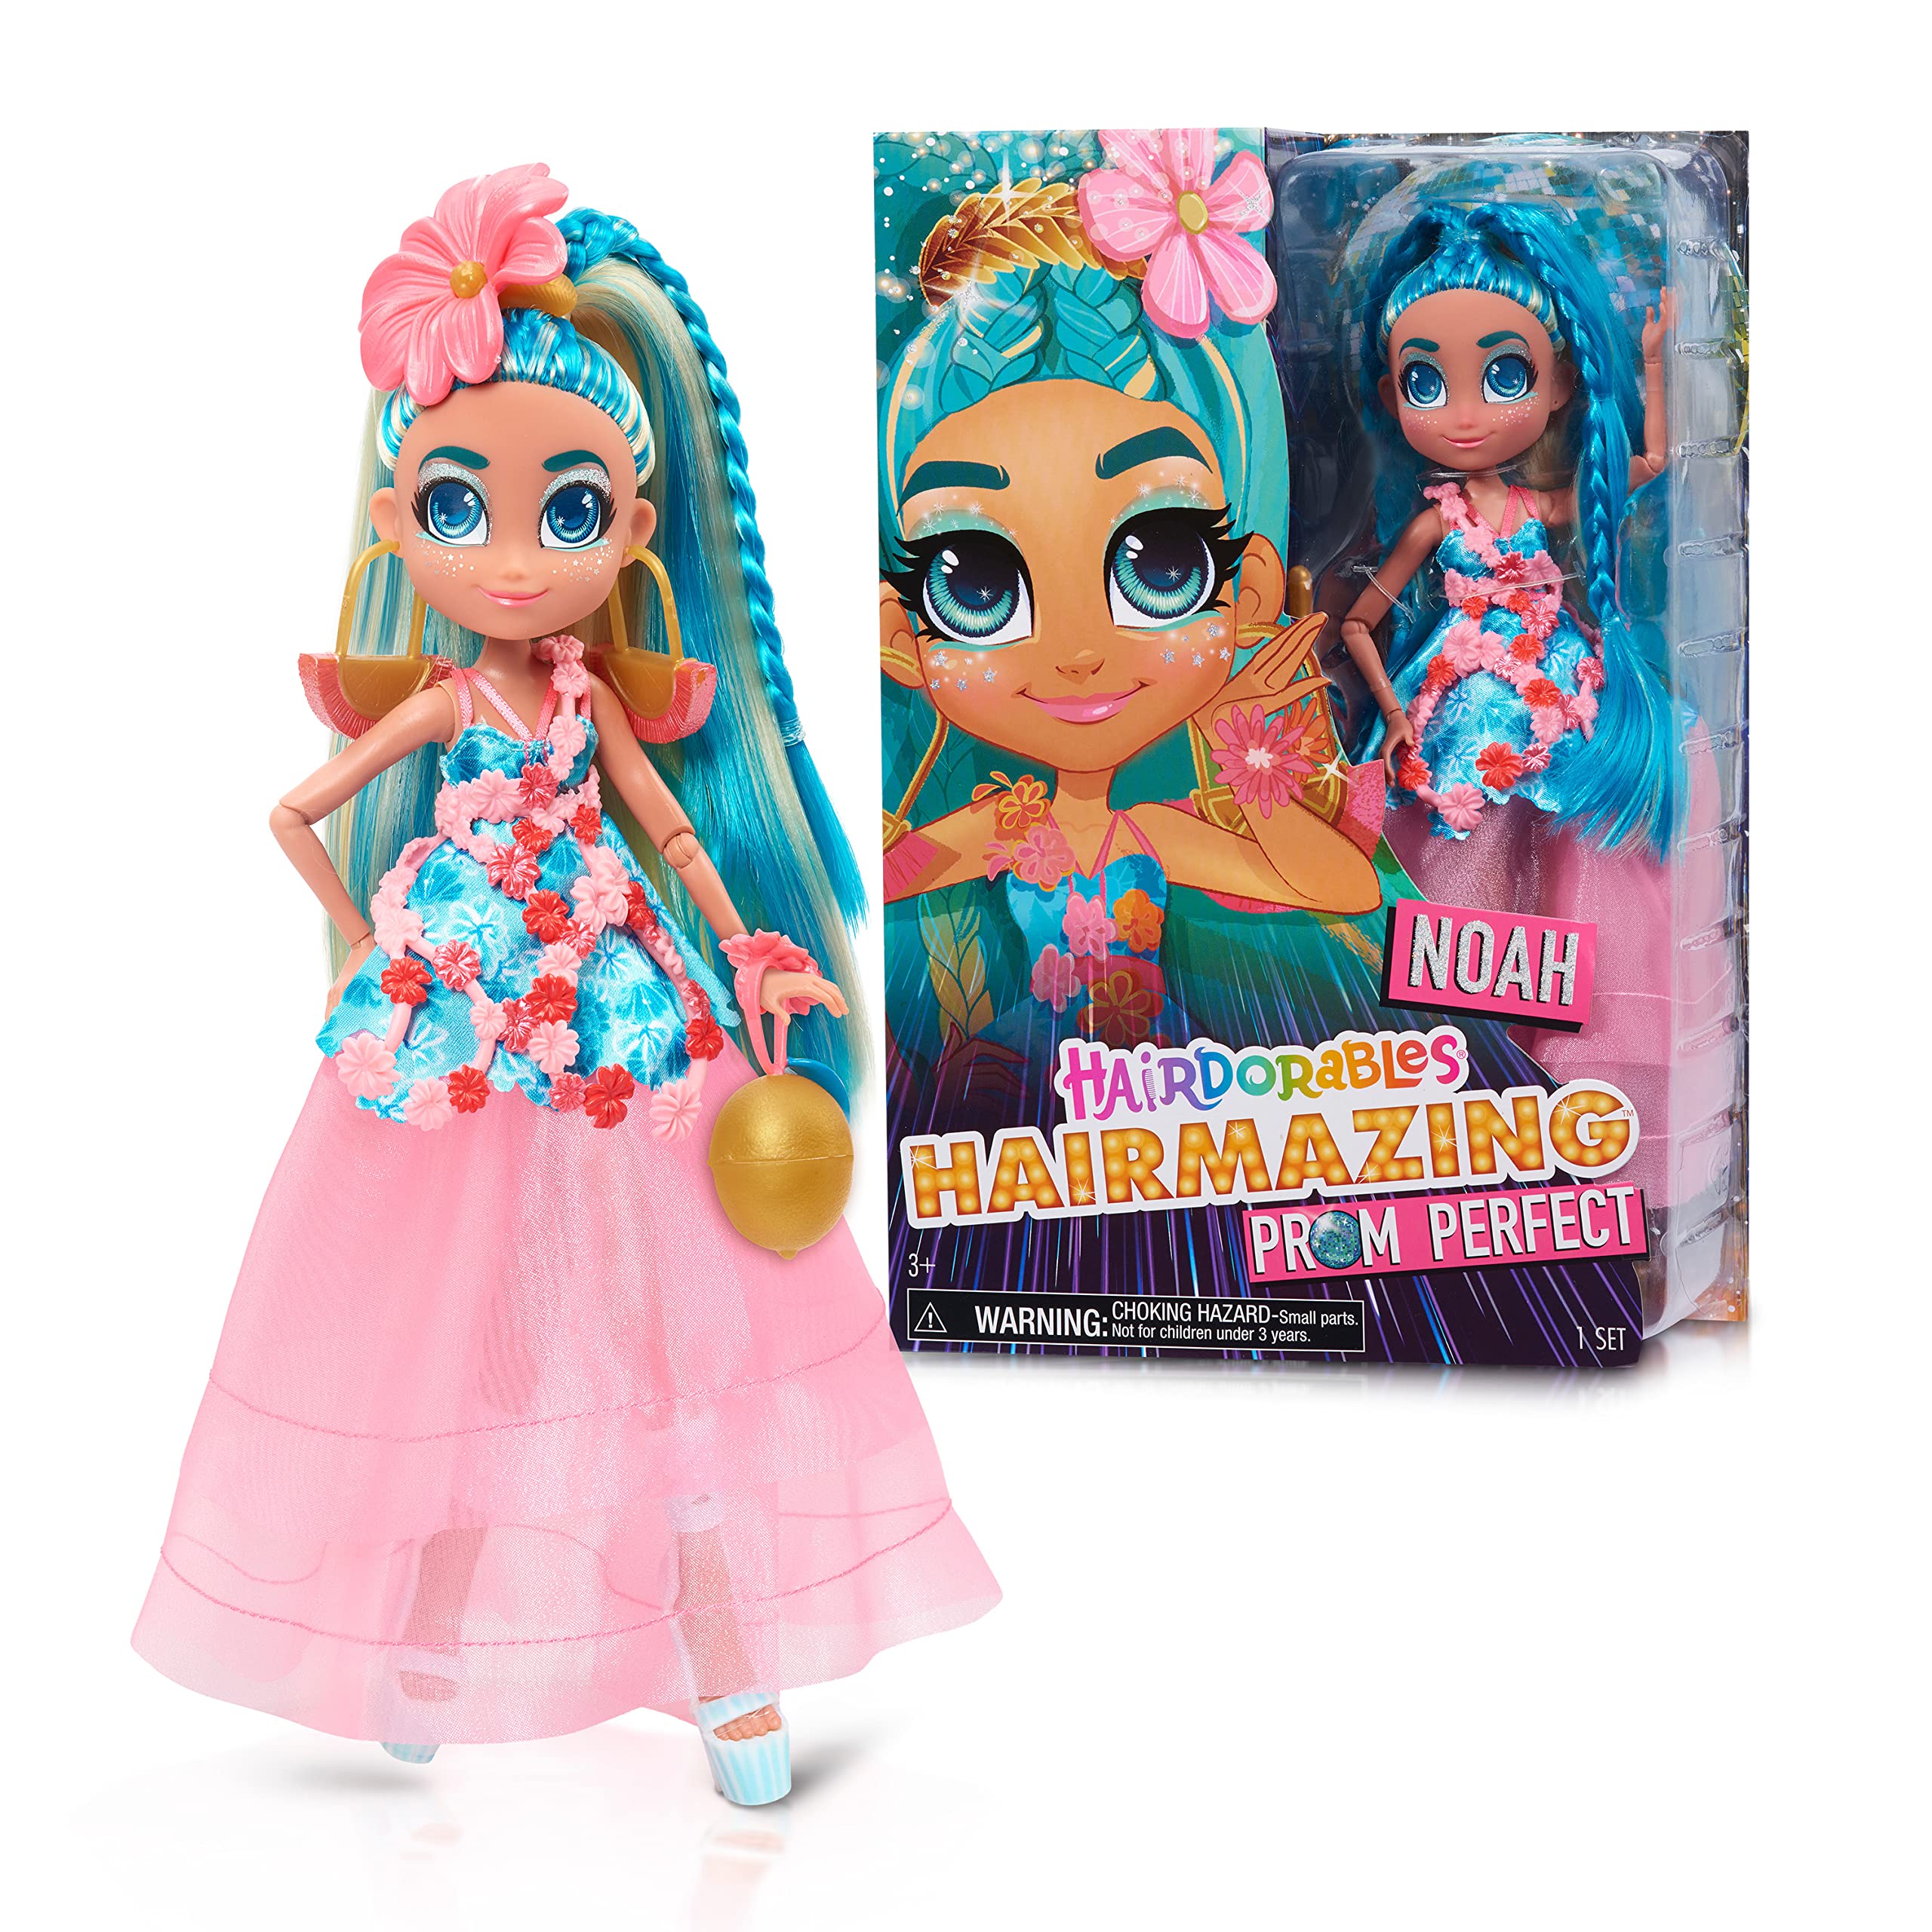 Hairdorables Hairmazing Prom Perfect Fashion Dolls, Noah, Blue and Blonde Hair, Kids Toys for Ages 3 Up, Gifts and Presents by Just Play